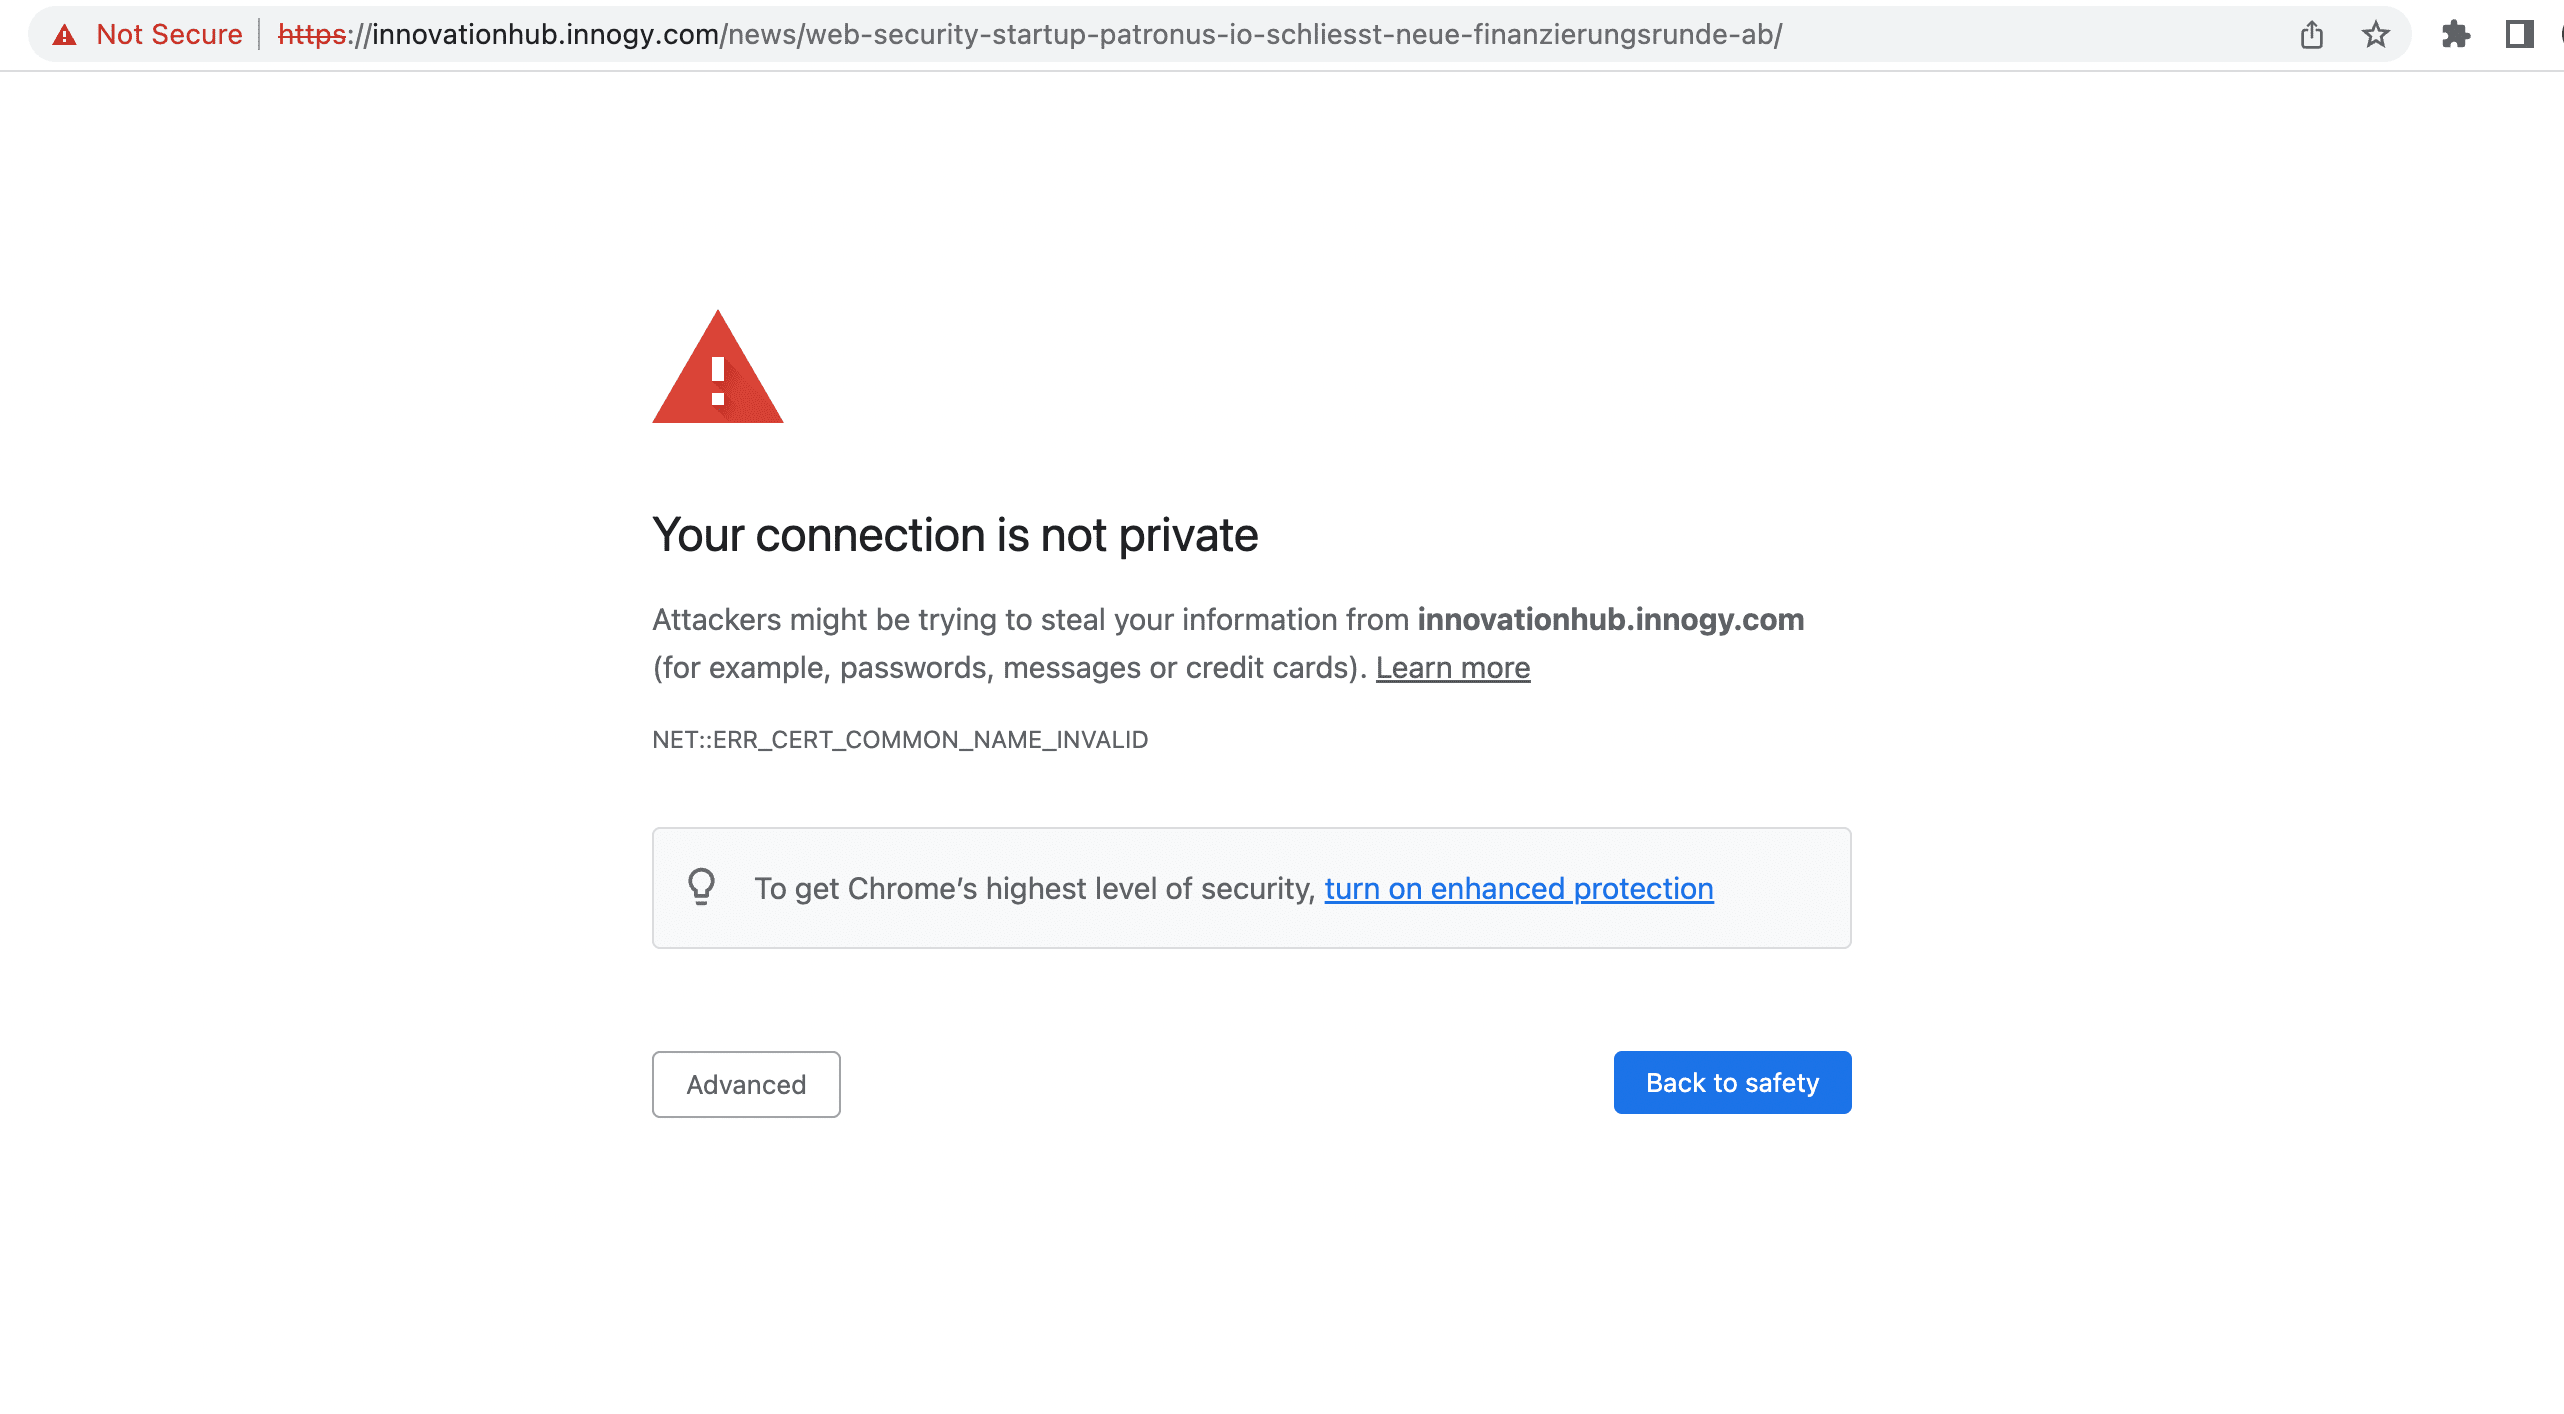 Your connection is not private message